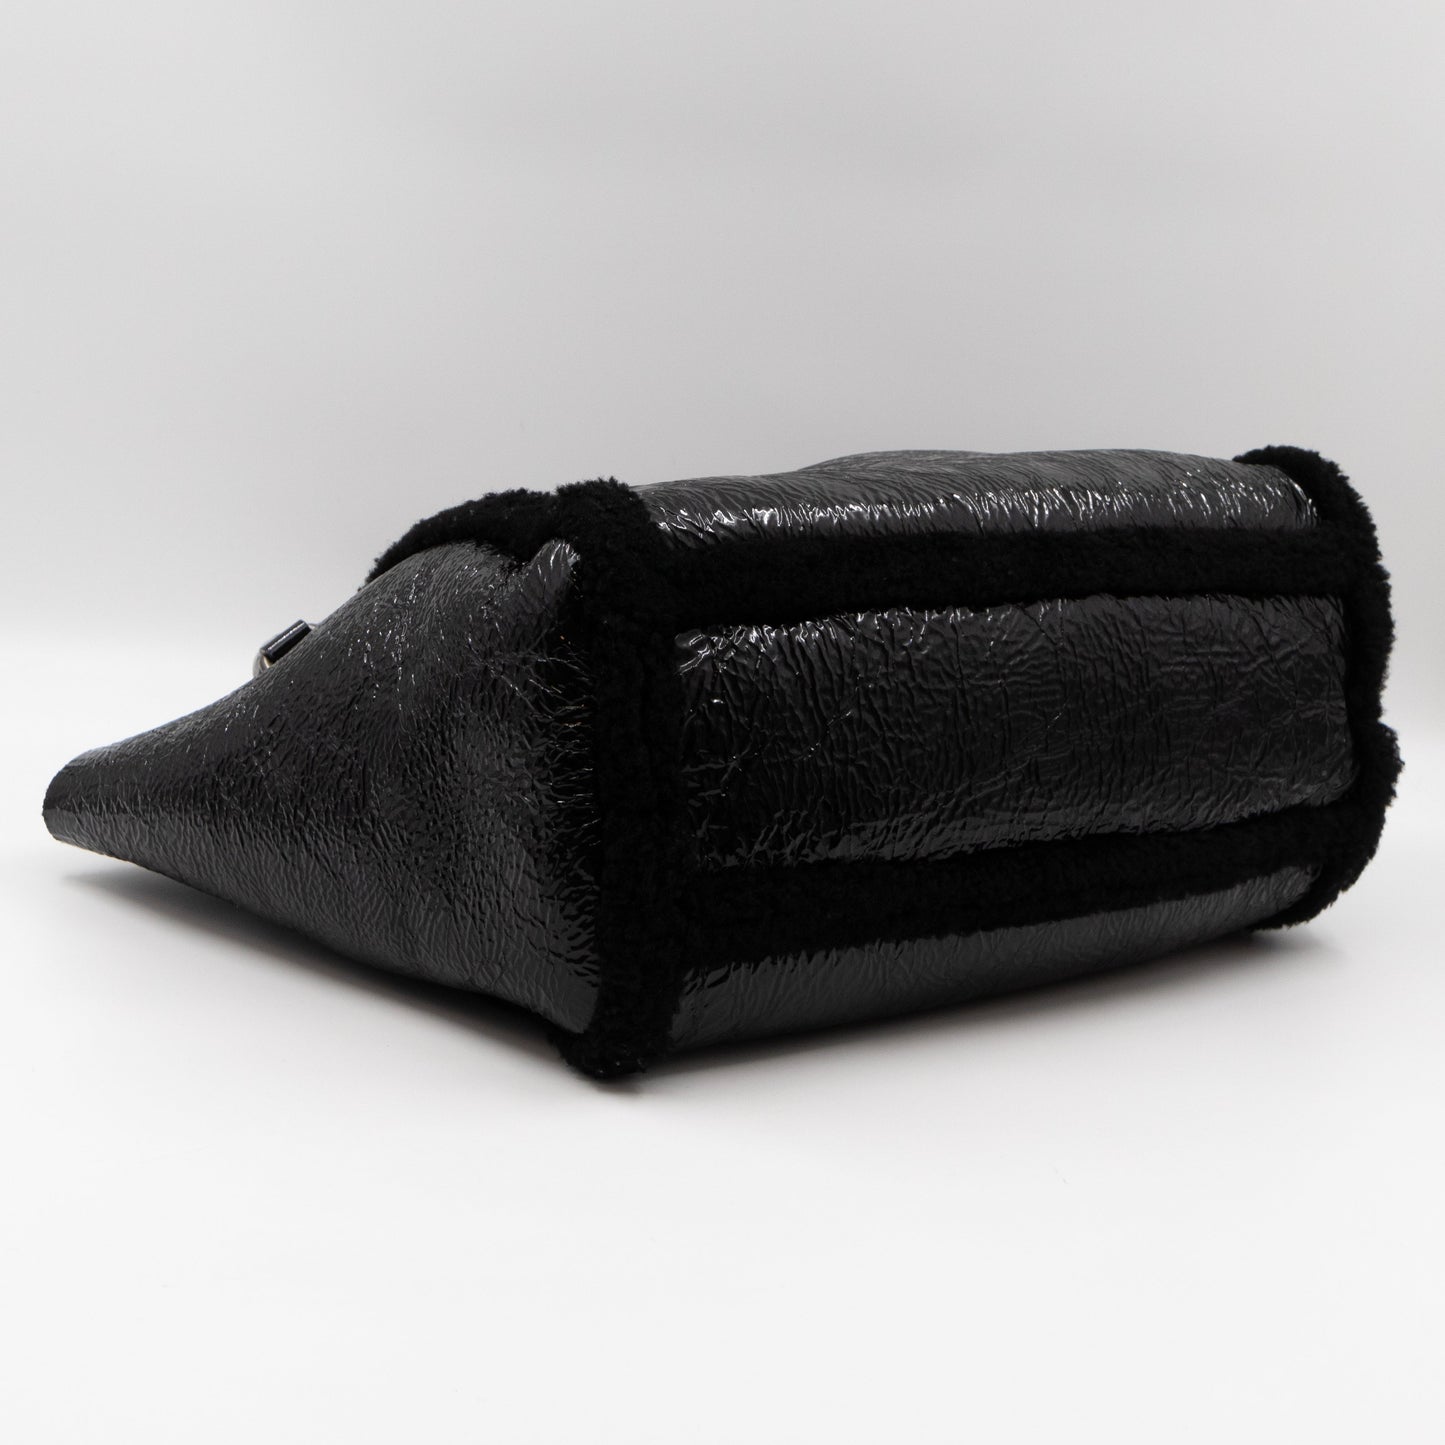 Soho Tote Wool Shearling Crushed Black Patent Leather